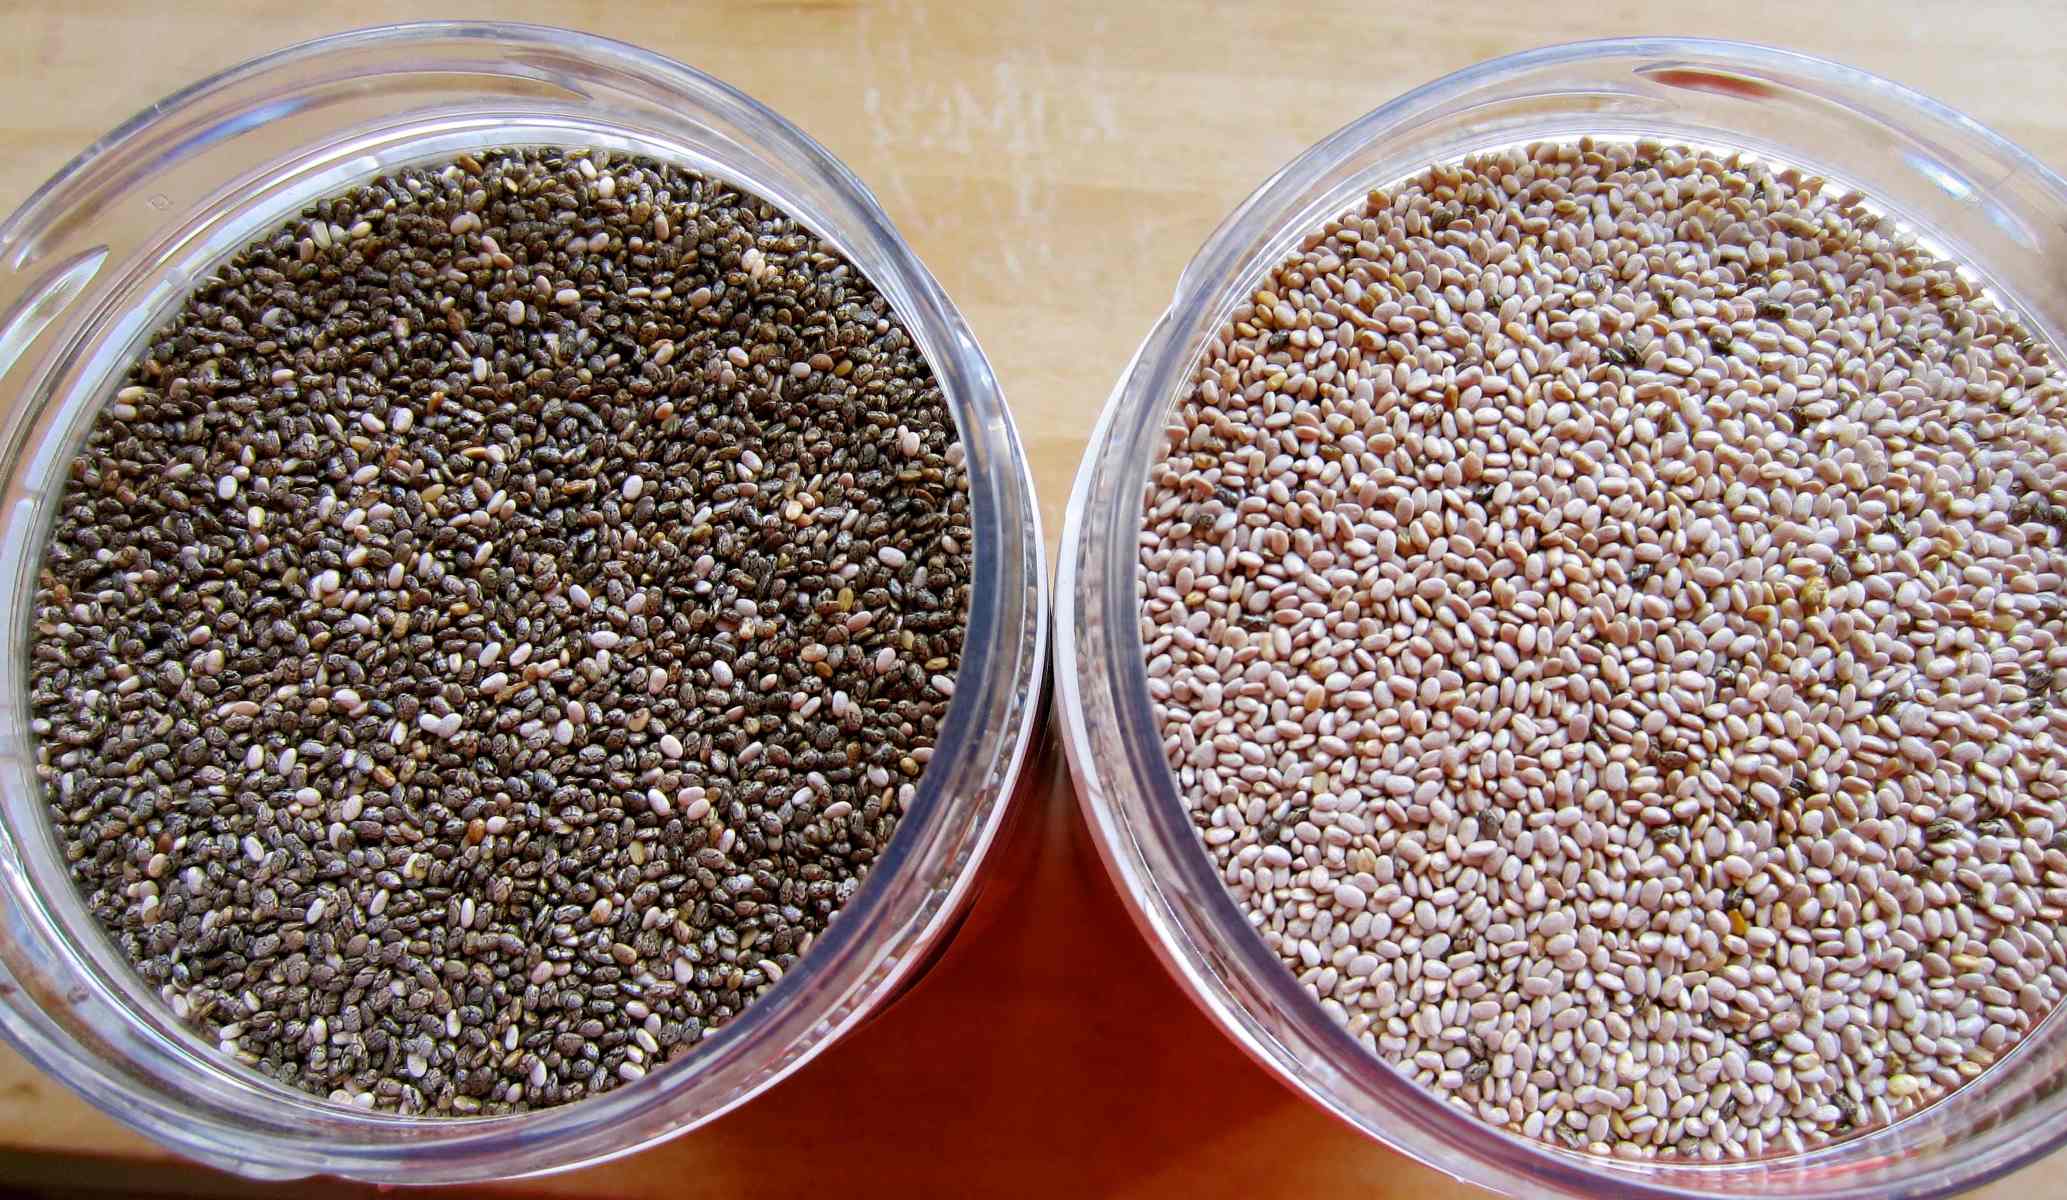 What Is The Difference Between Black And White Chia Seeds